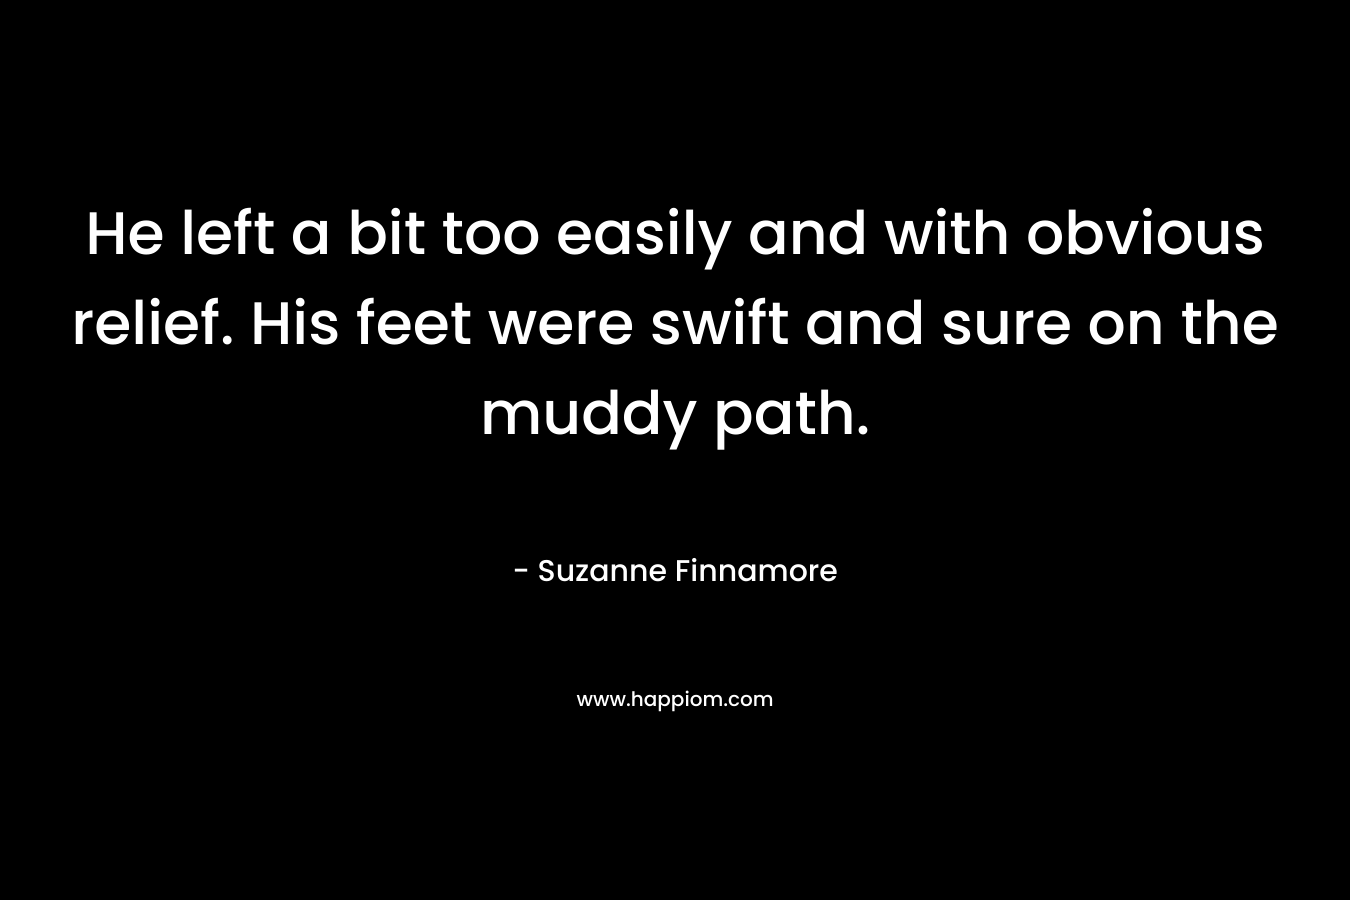 He left a bit too easily and with obvious relief. His feet were swift and sure on the muddy path. – Suzanne Finnamore